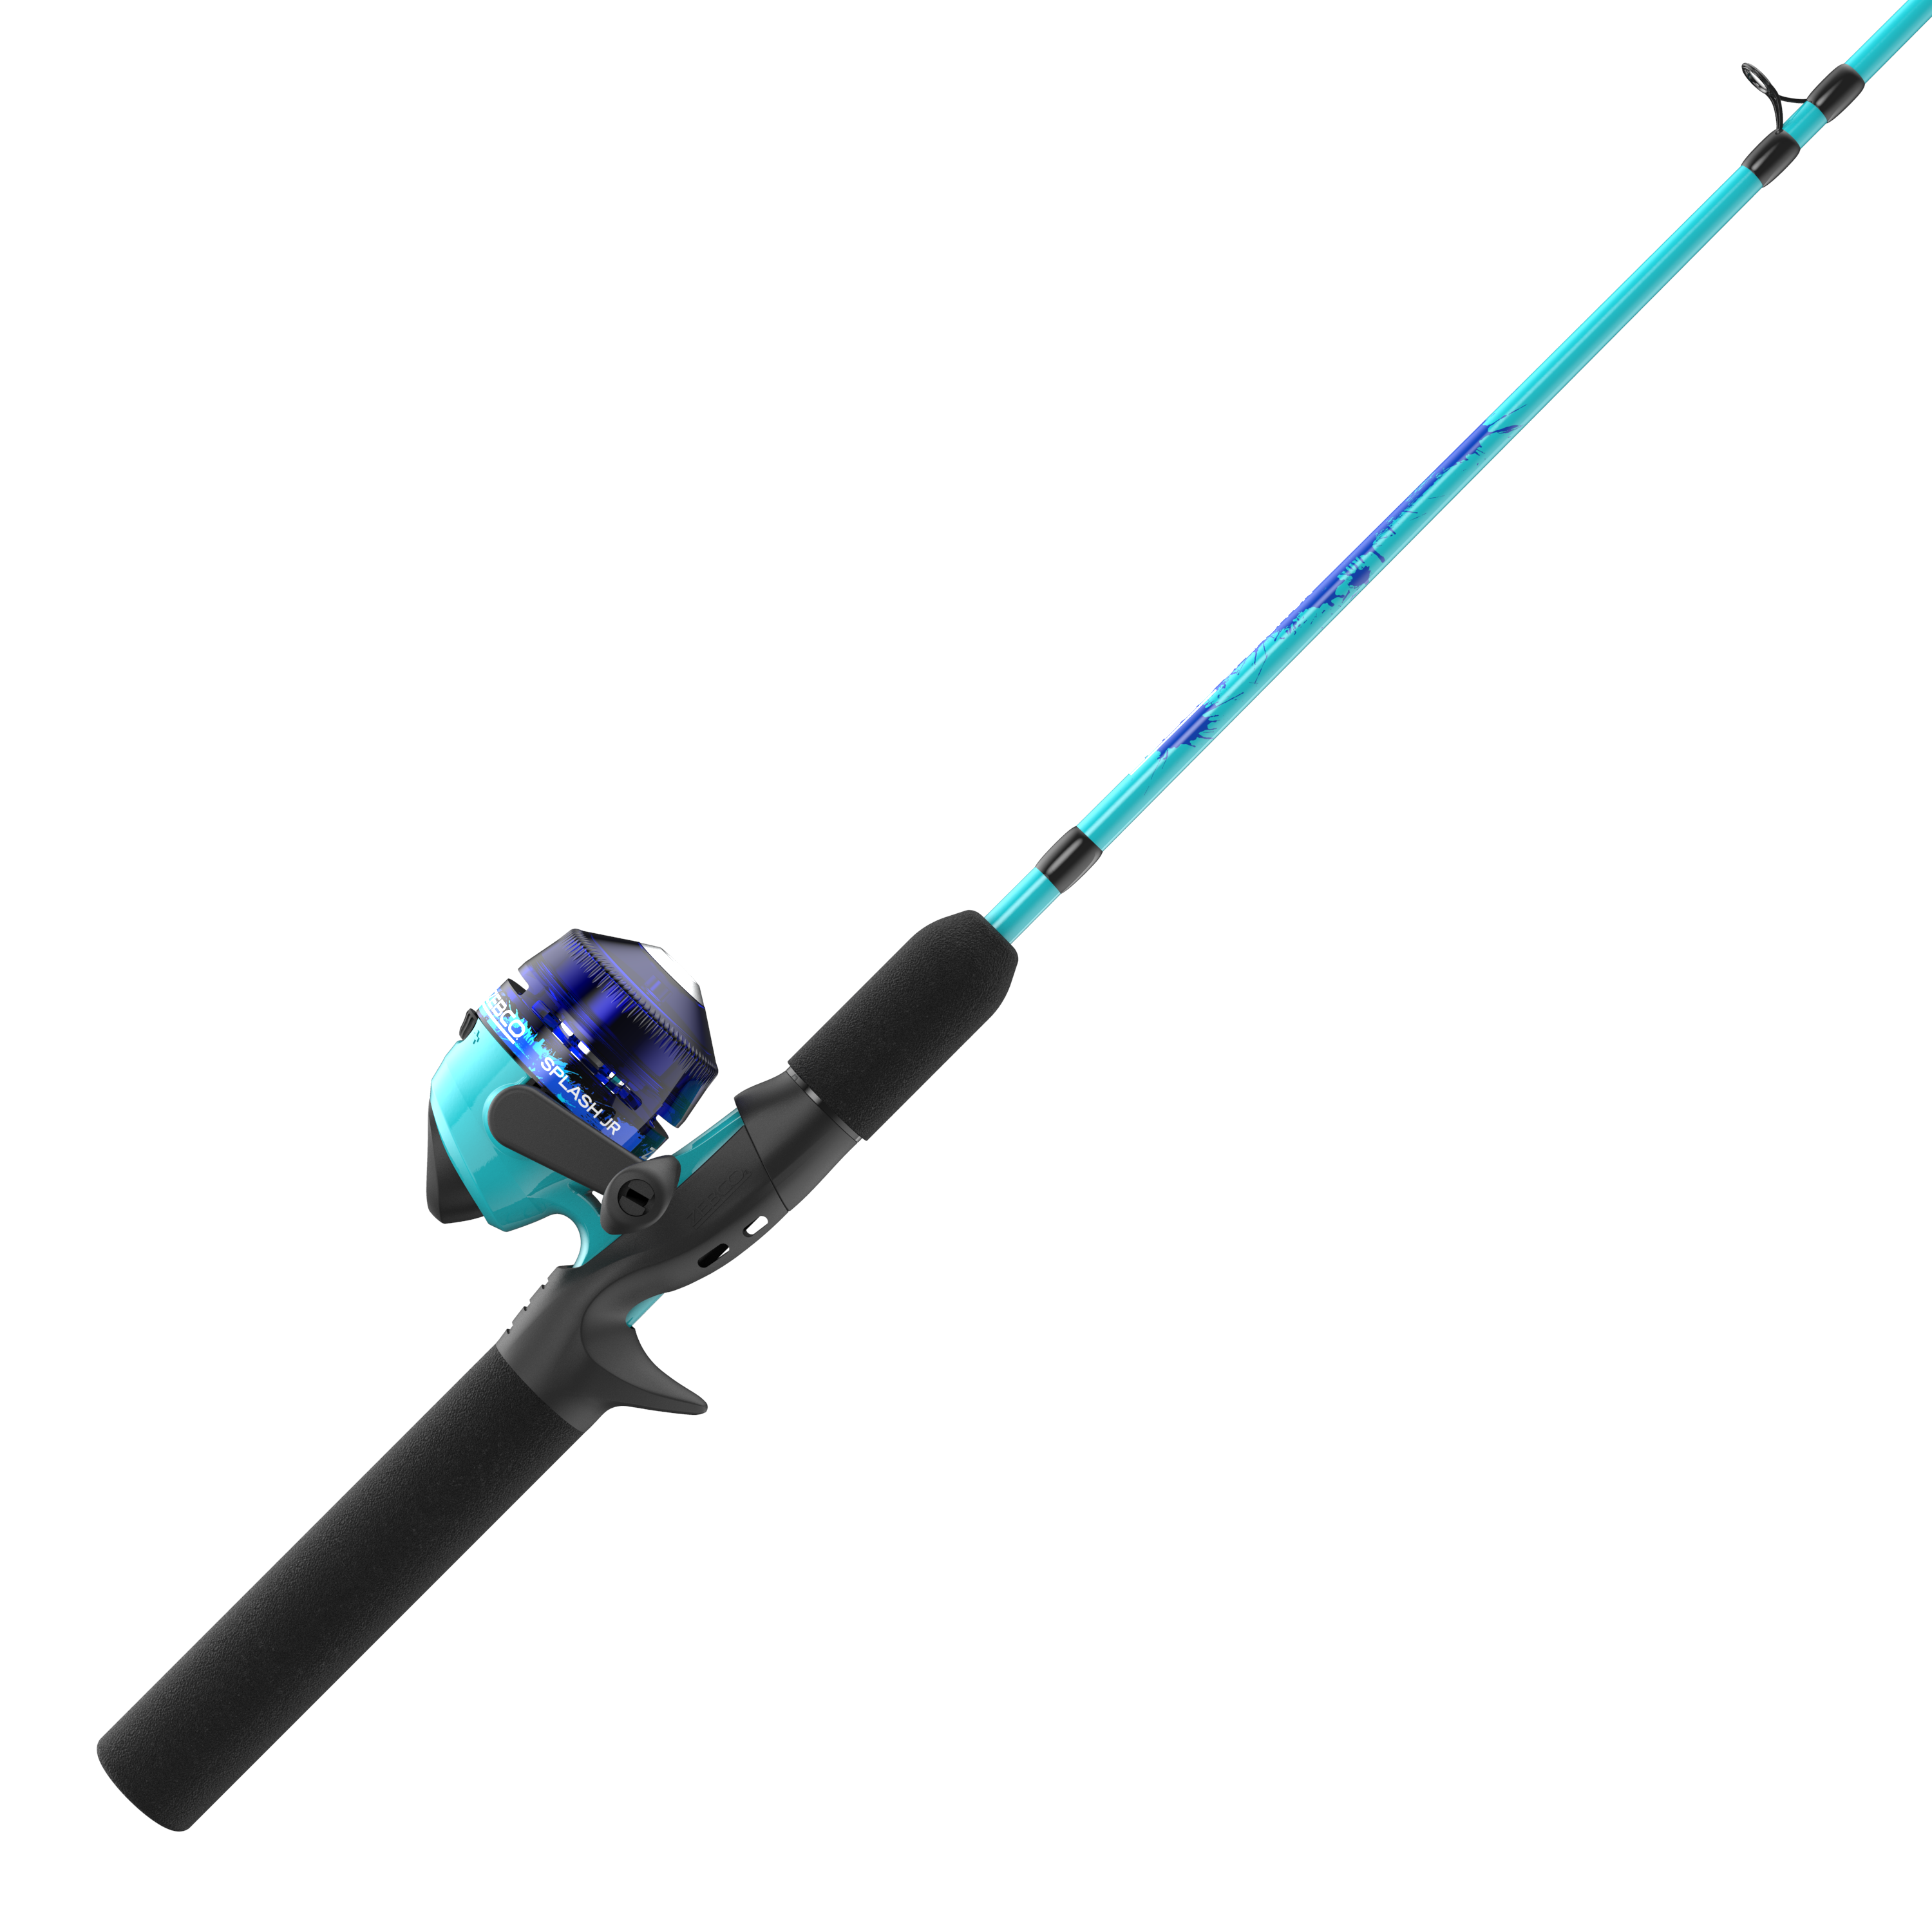  Zebco Kids Splash Floating Spincast Reel And Fishing Rod  Combo, 29-Inch 1-Piece Fishing Pole, Size 20 Reel, Right-Hand Retrieve,  Pre-Spooled